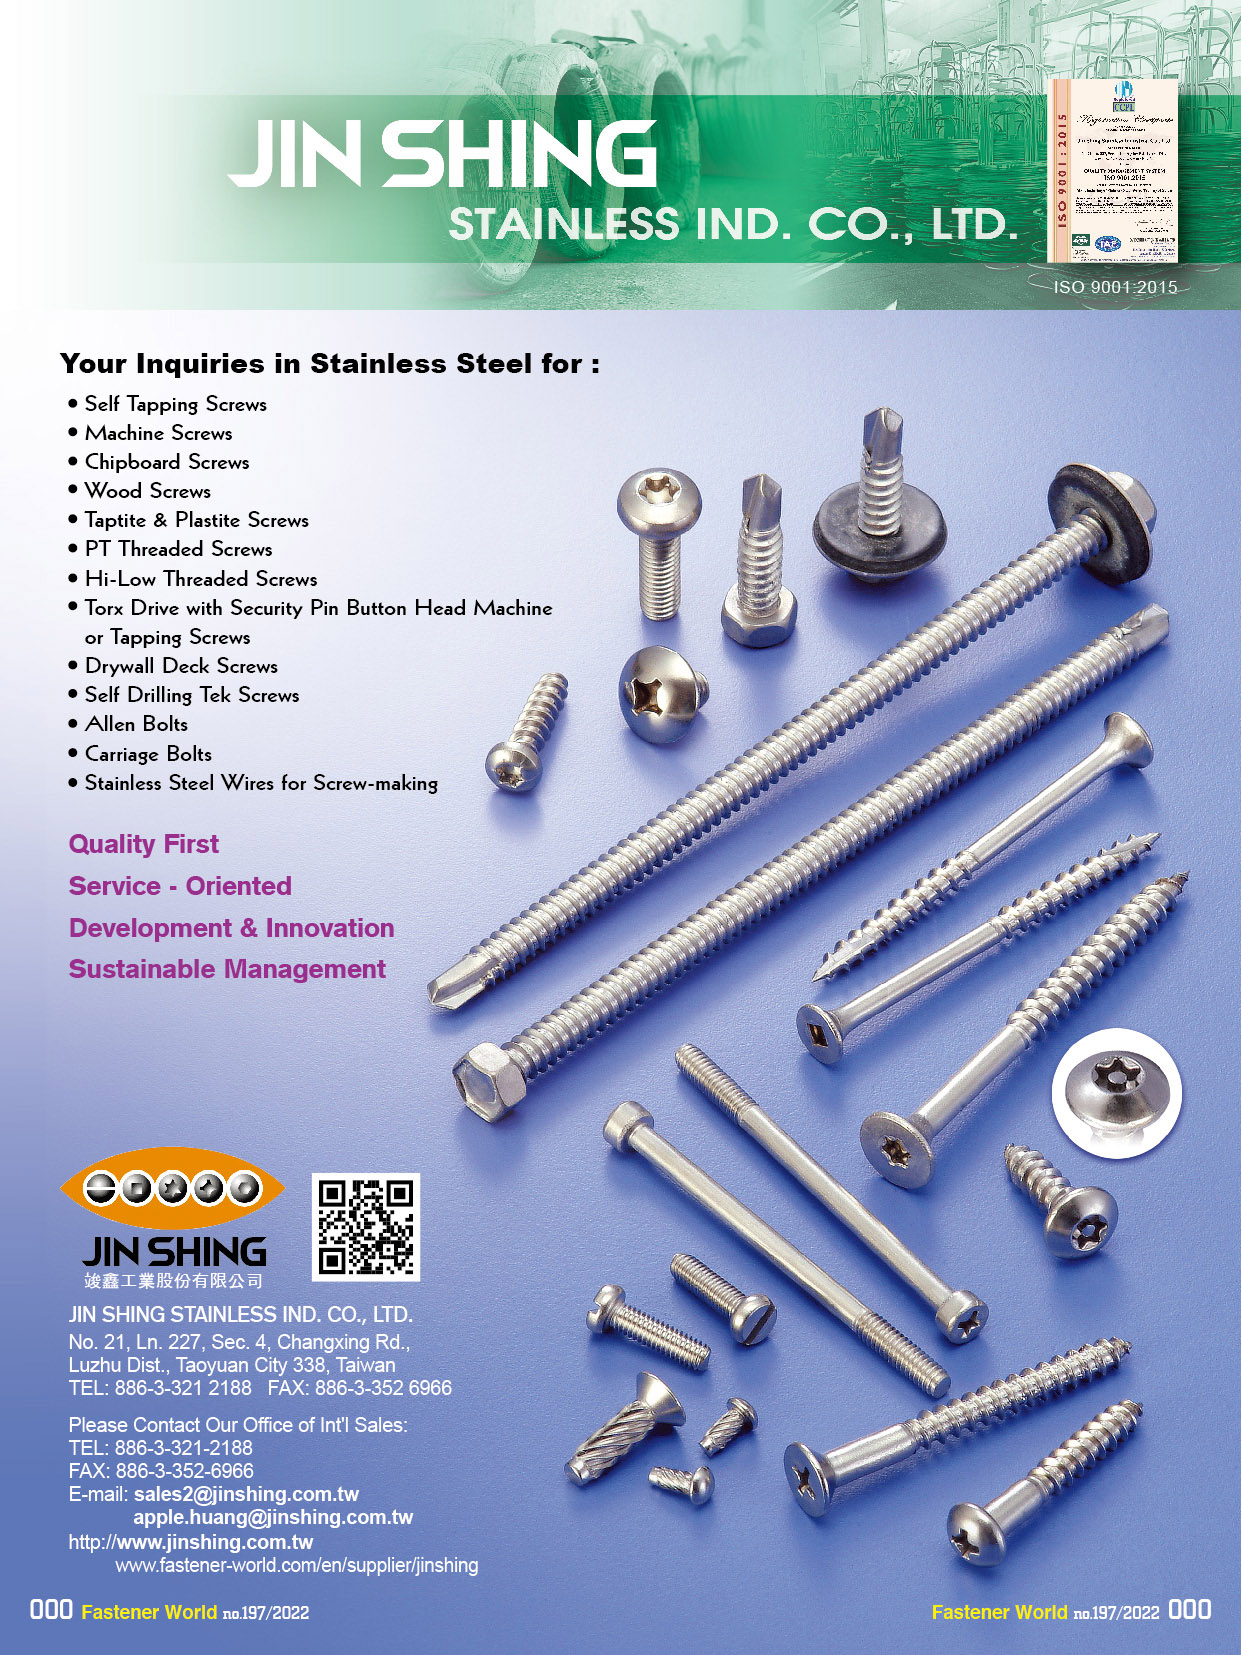 JIN SHING STAINLESS IND. CO., LTD. , Slef Tapping Screws, Machine Screws, Chipboard Screws, Wood Screws, Taptite & Plastite Screws, PT Threaded Screws, High-Low Threaded Screws, Torx Drive with Security Pin Button Head Machine or Tapping Screws, Drywall Deck Screws, Self Drilling Tek Screws, Allen Bolts, Carriage Bolts, Stainless Steel Wires for Screw-making , Self-Tapping Screws